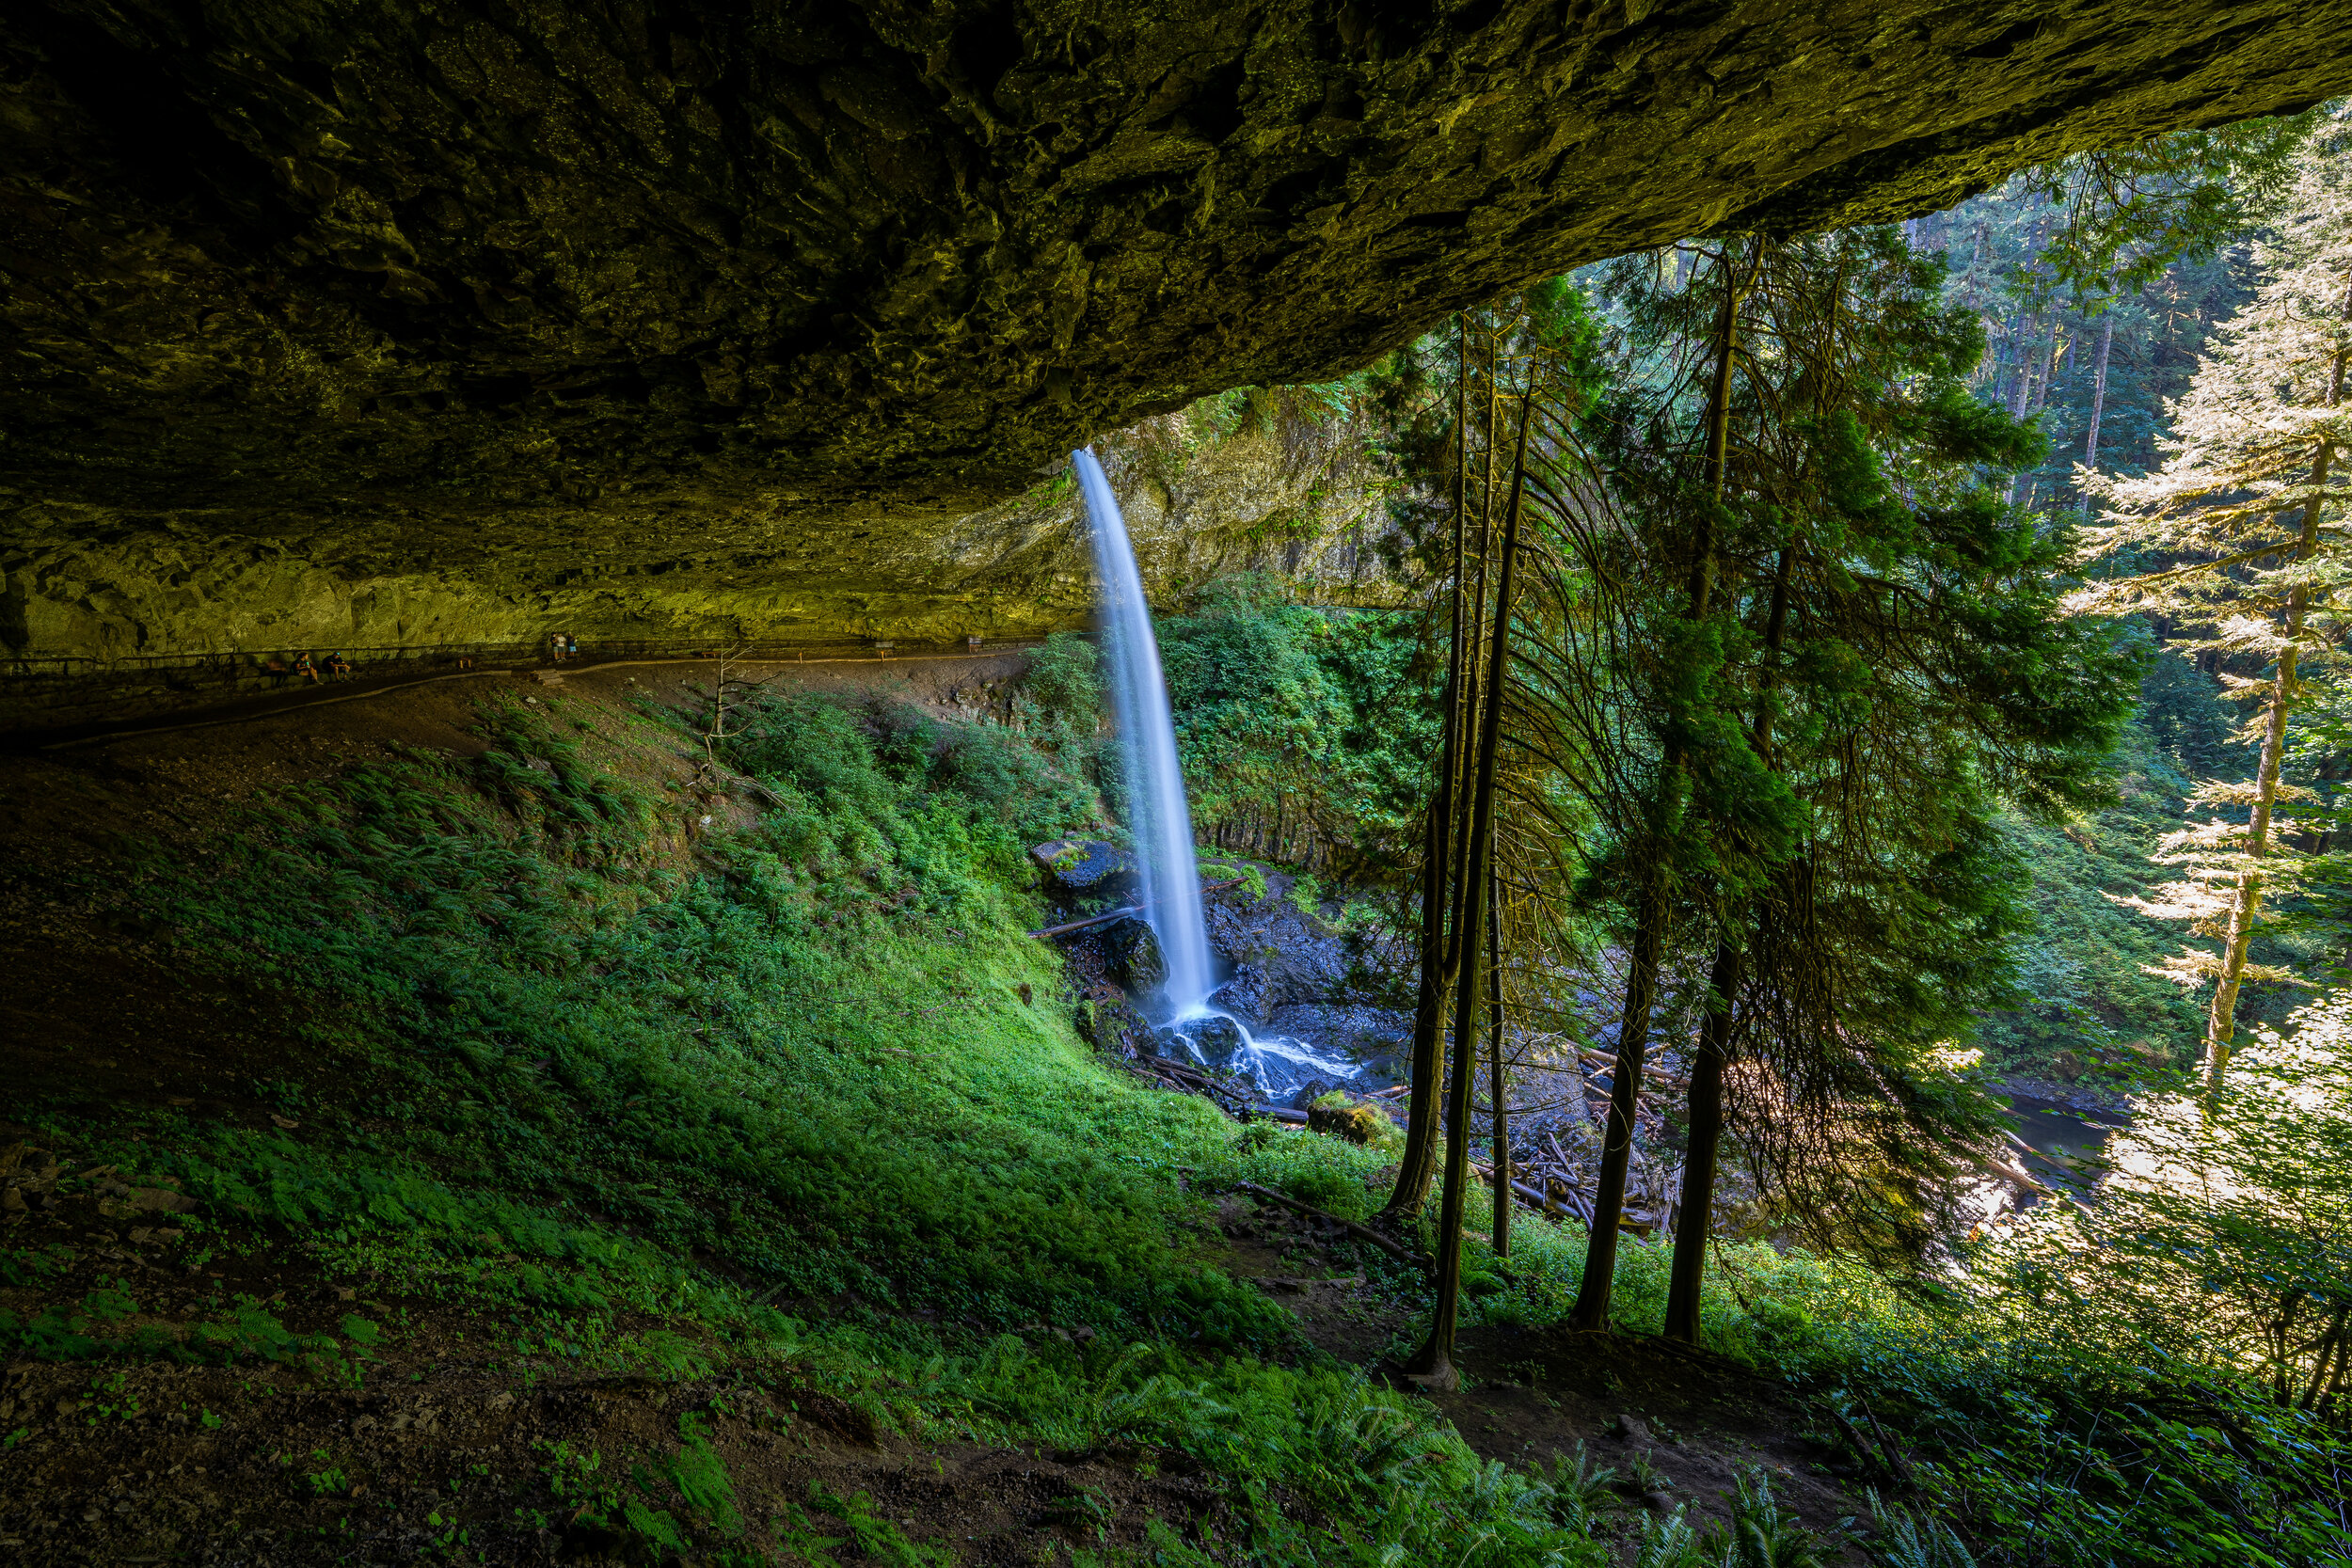  At  Silver Falls State Park  in Sublimity, OR, Craig and Aunt Polly hiked the breathtaking 7.2-mile hike around the  Trail of Ten Falls.  At this fall, the trail bends behind the water. If you look closely, you can appreciate the size of this specta